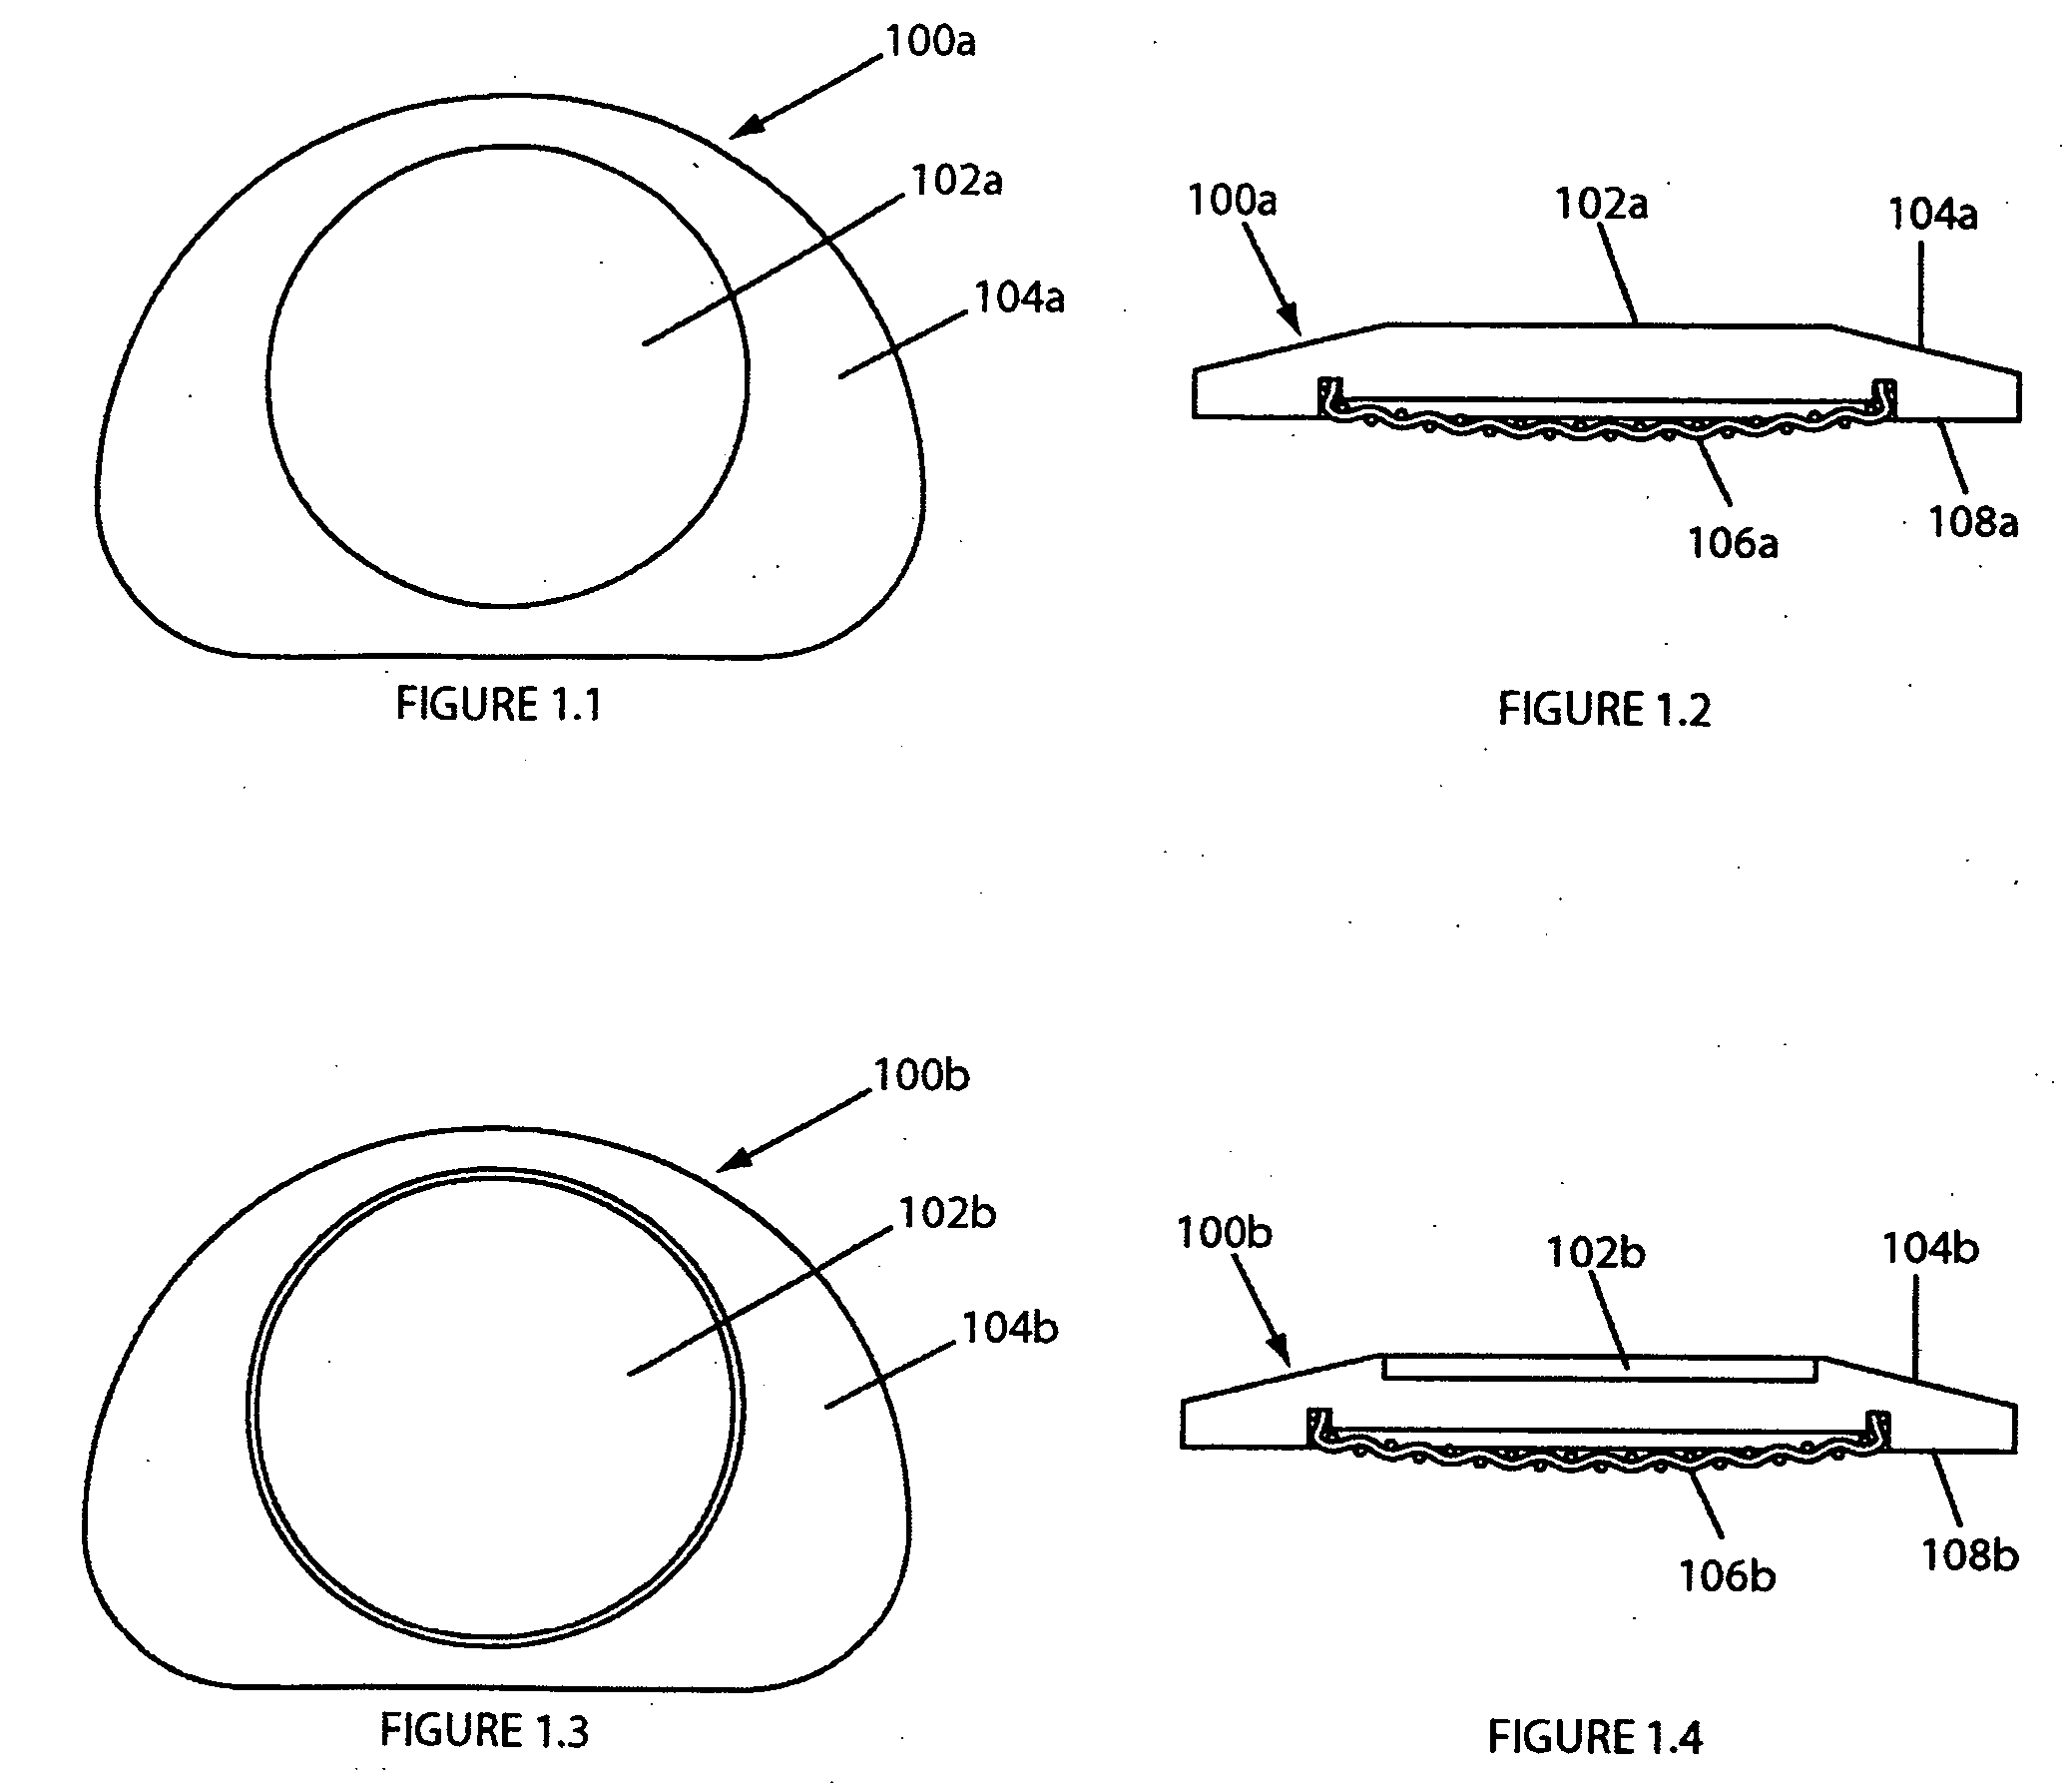 Intervertebral implant having features for controlling angulation thereof